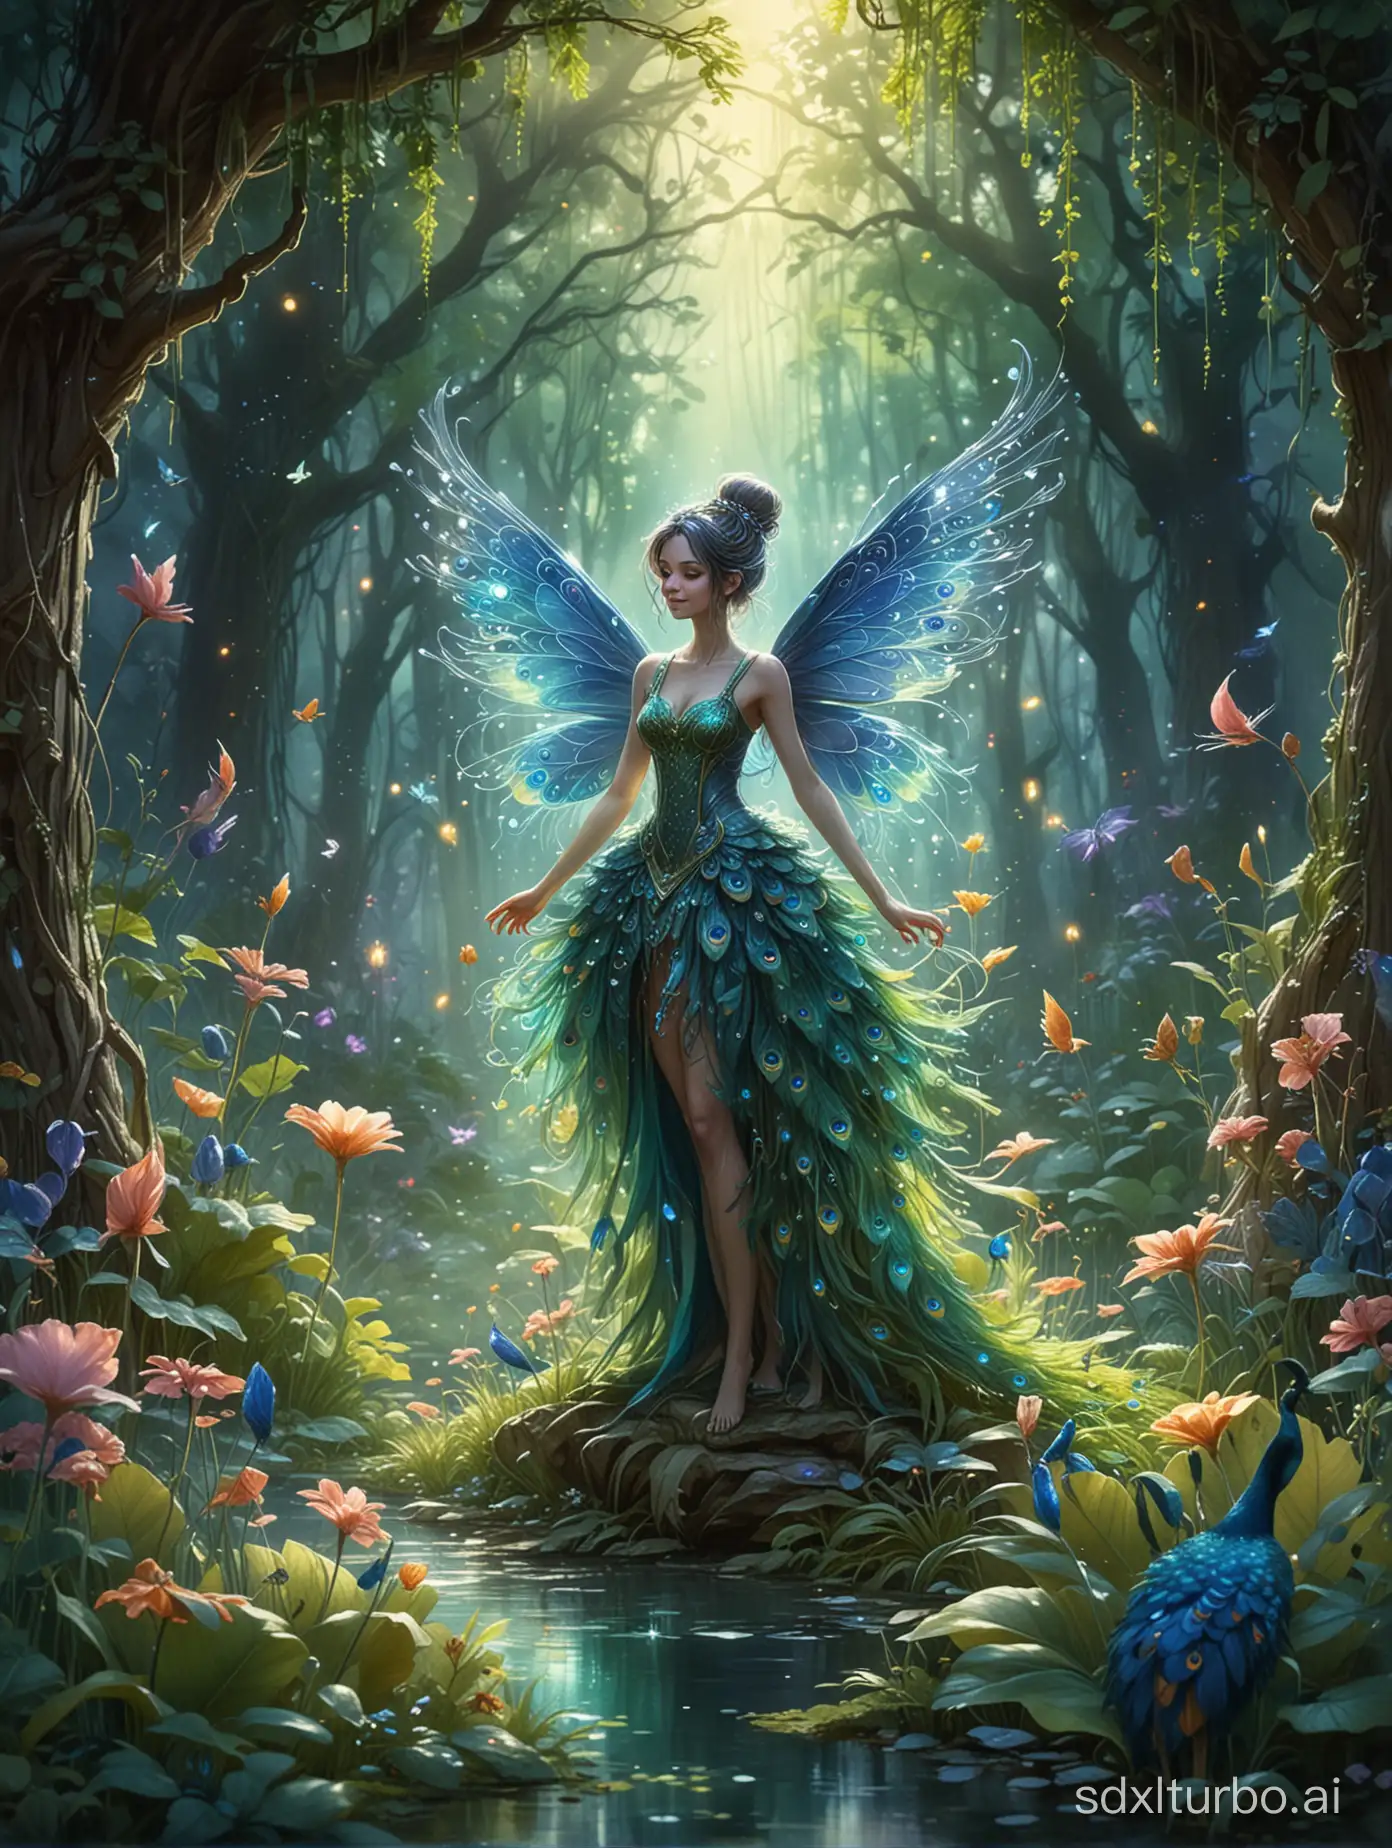 Enchanted-Fairy-Glade-with-Magical-Plumber-and-Peacock-Tones